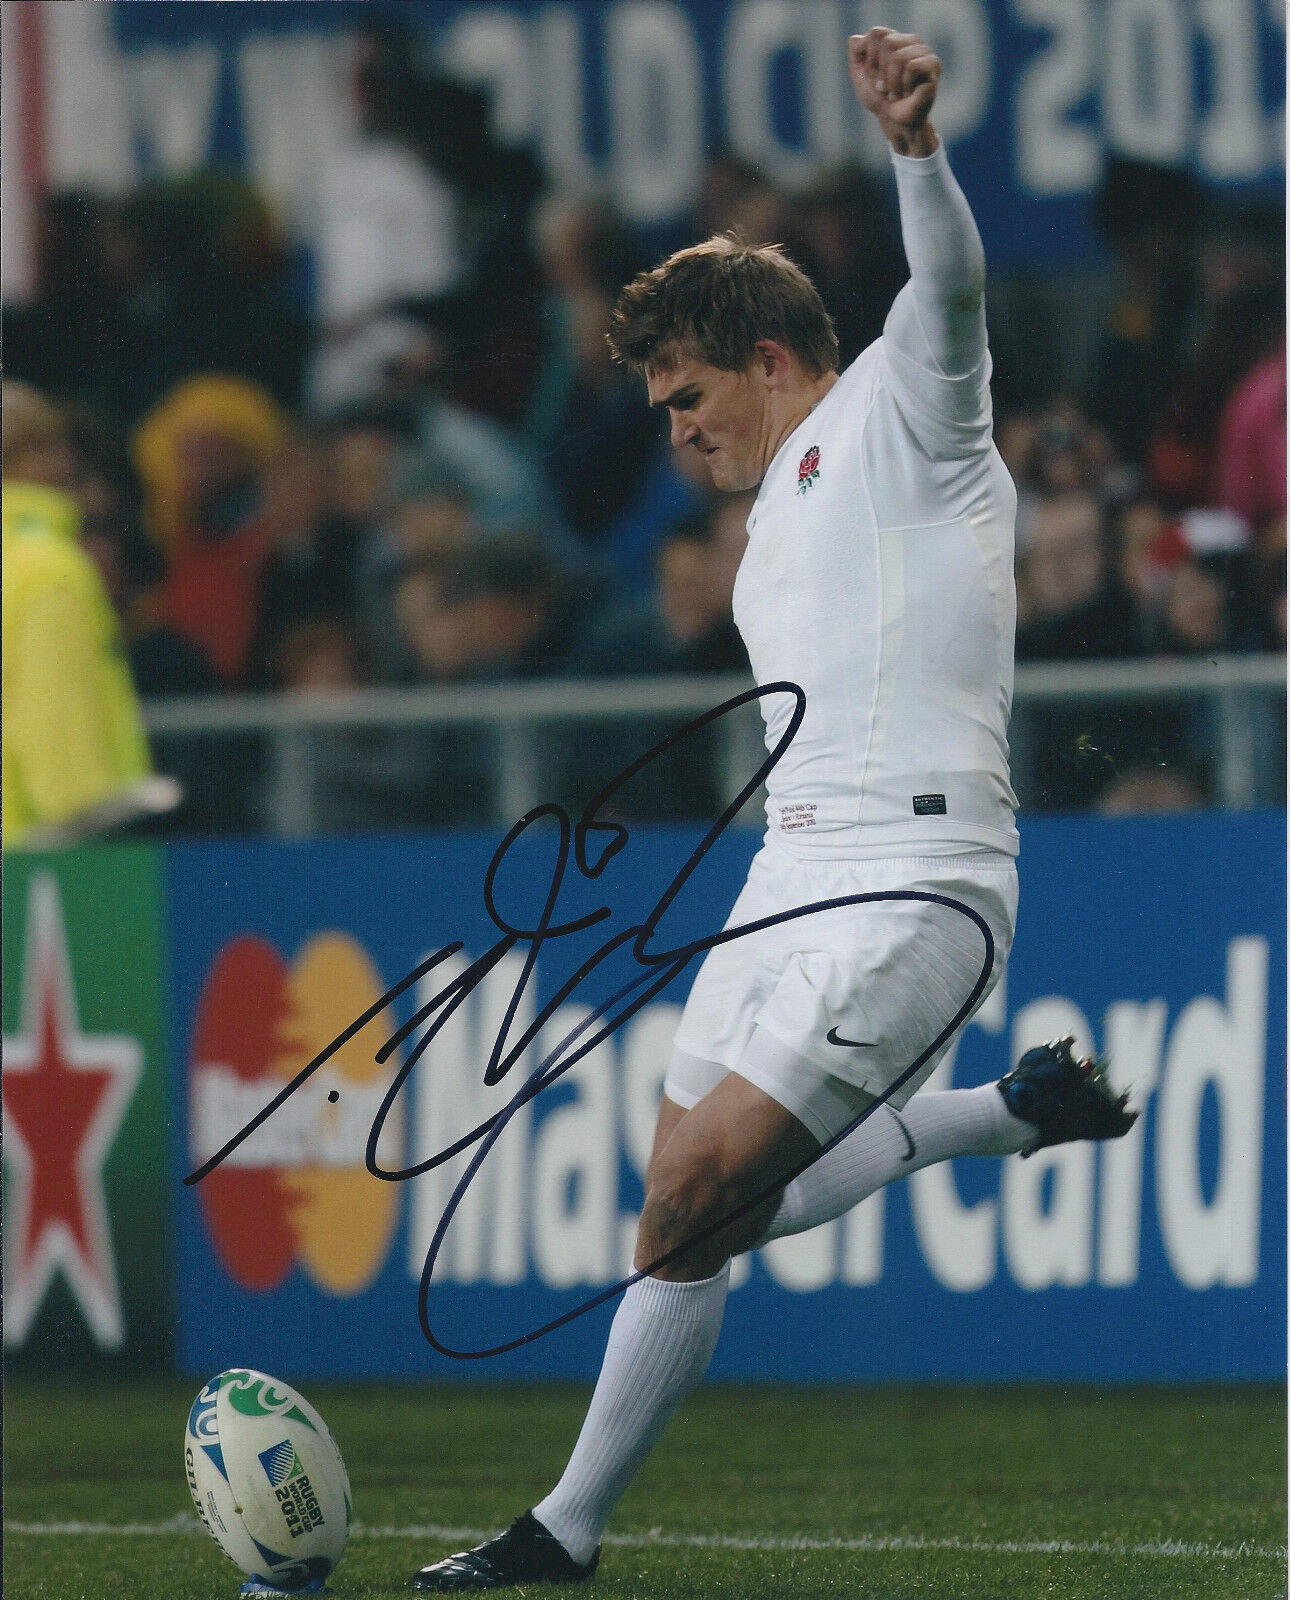 Toby FLOOD Signed Autograph 10x8 Photo Poster painting AFTAL COA RUGBY Union England 6 Nations